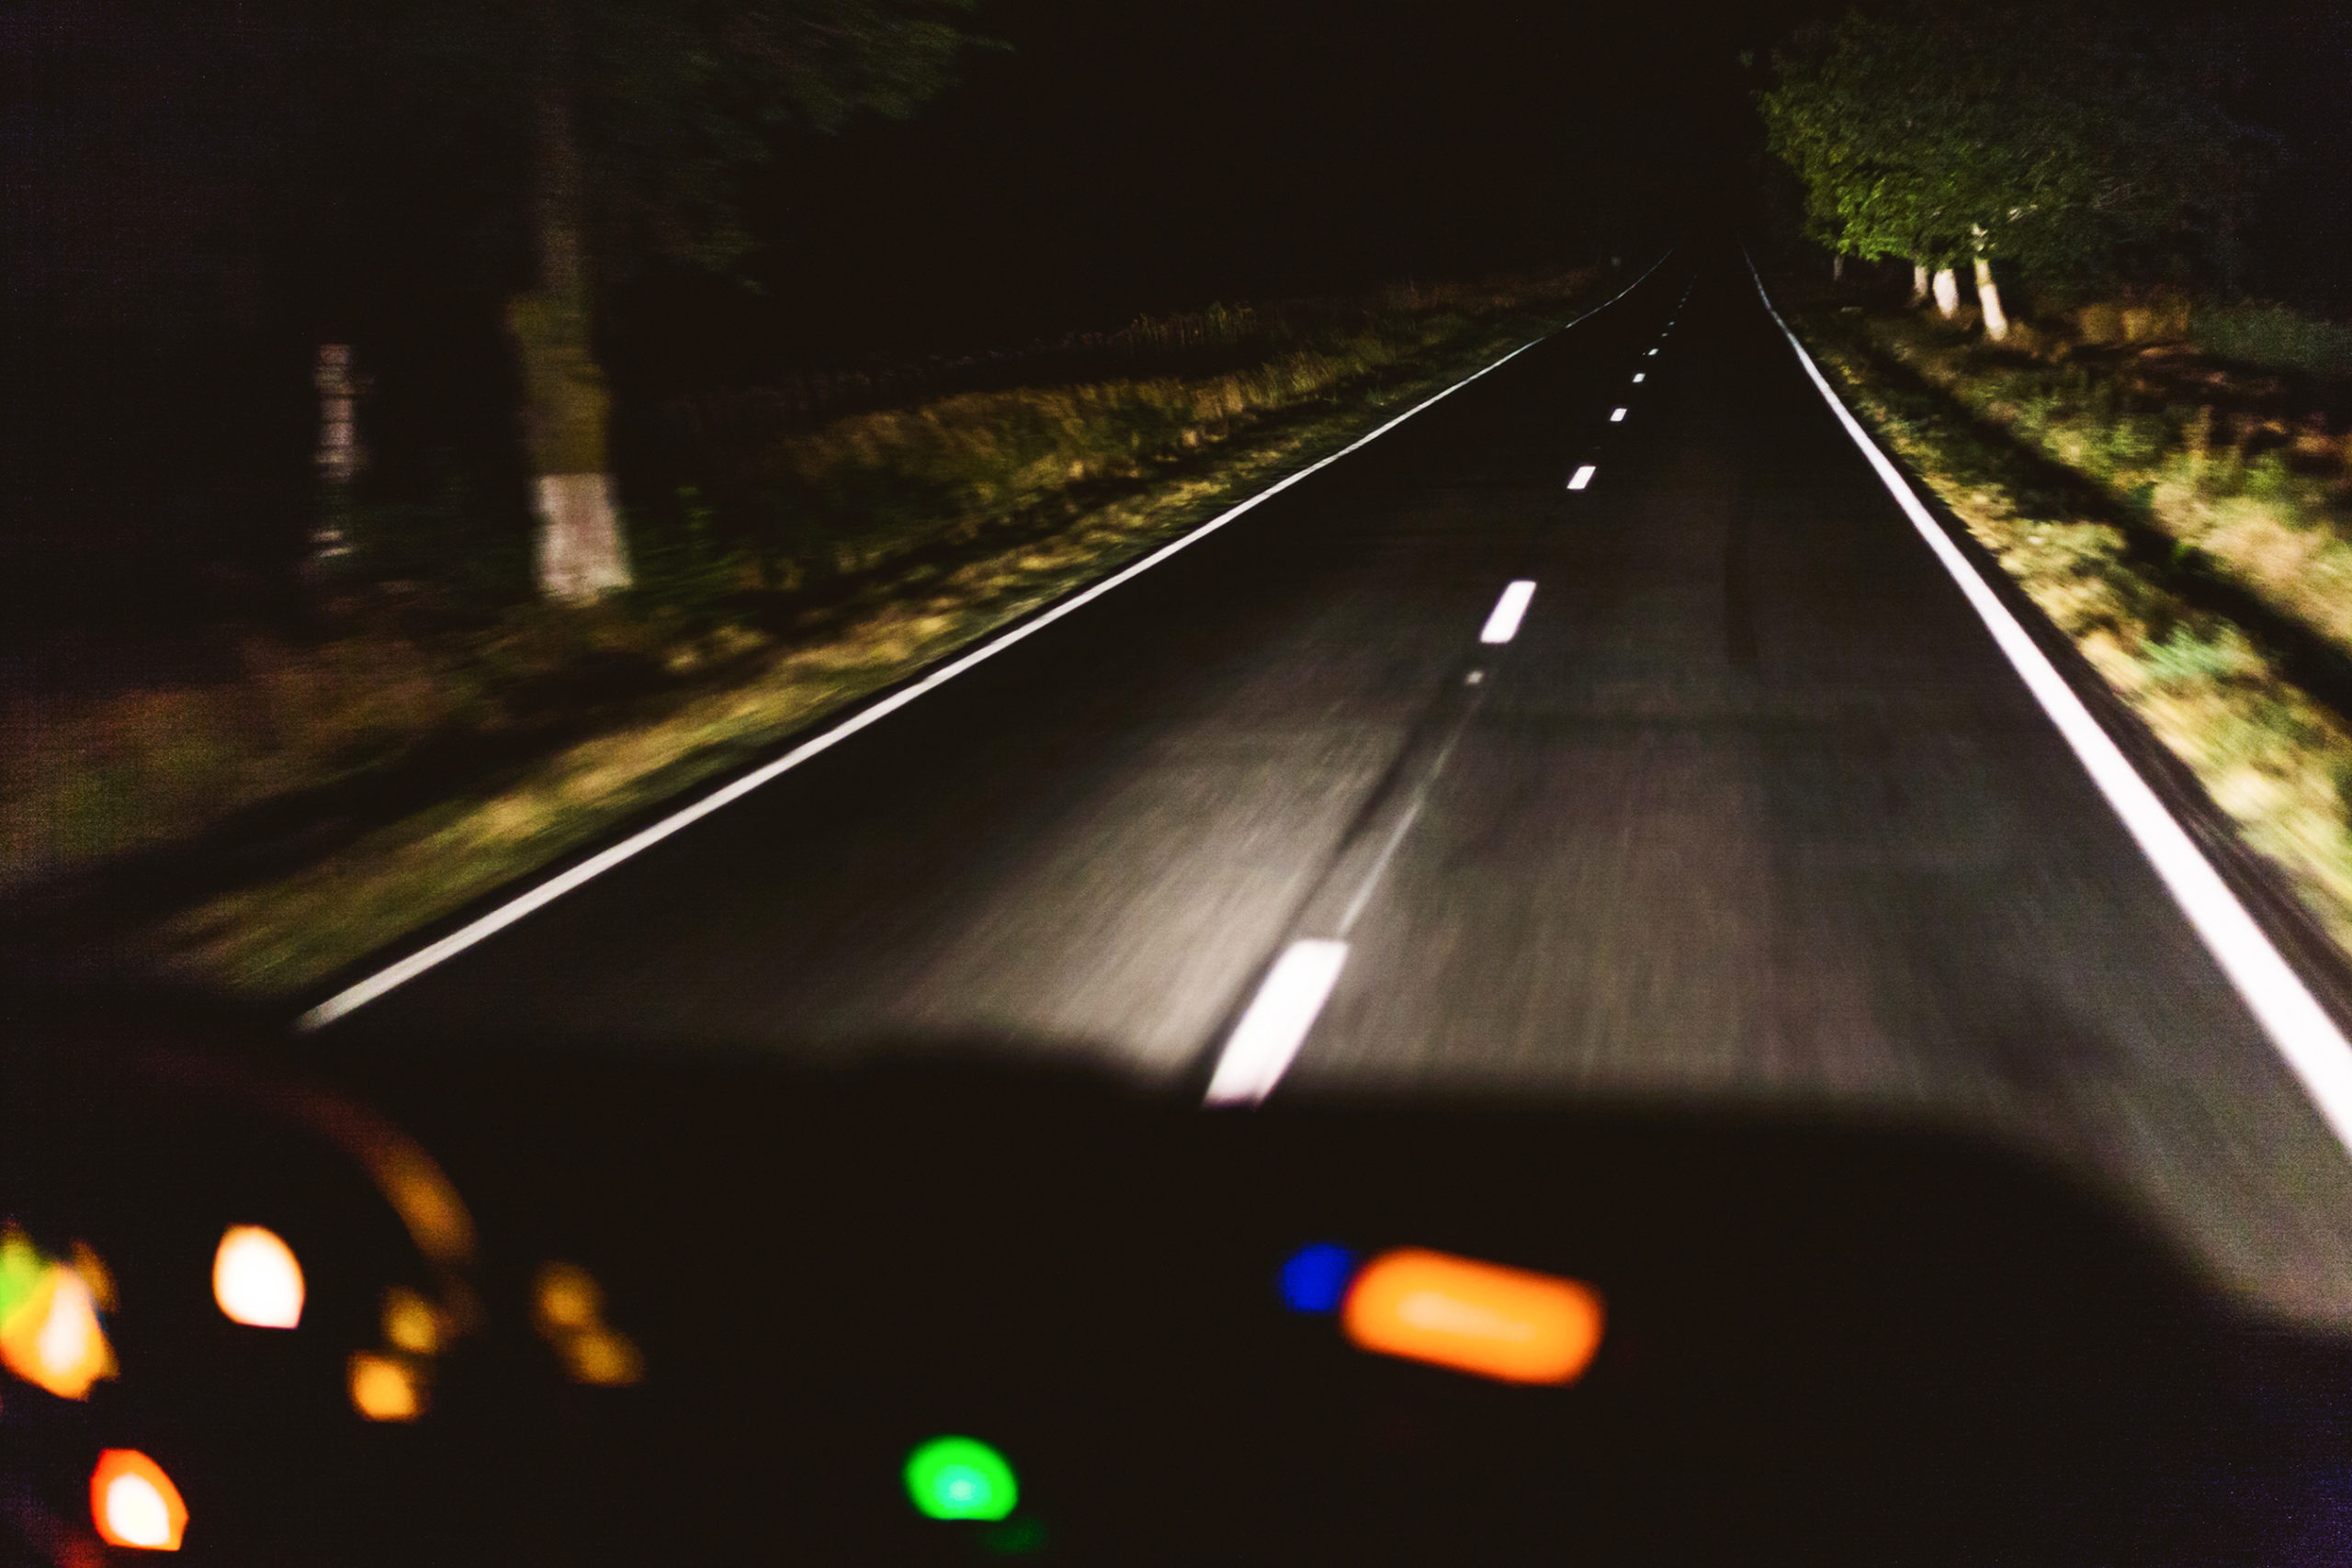 are there any dangers associated with driving at night